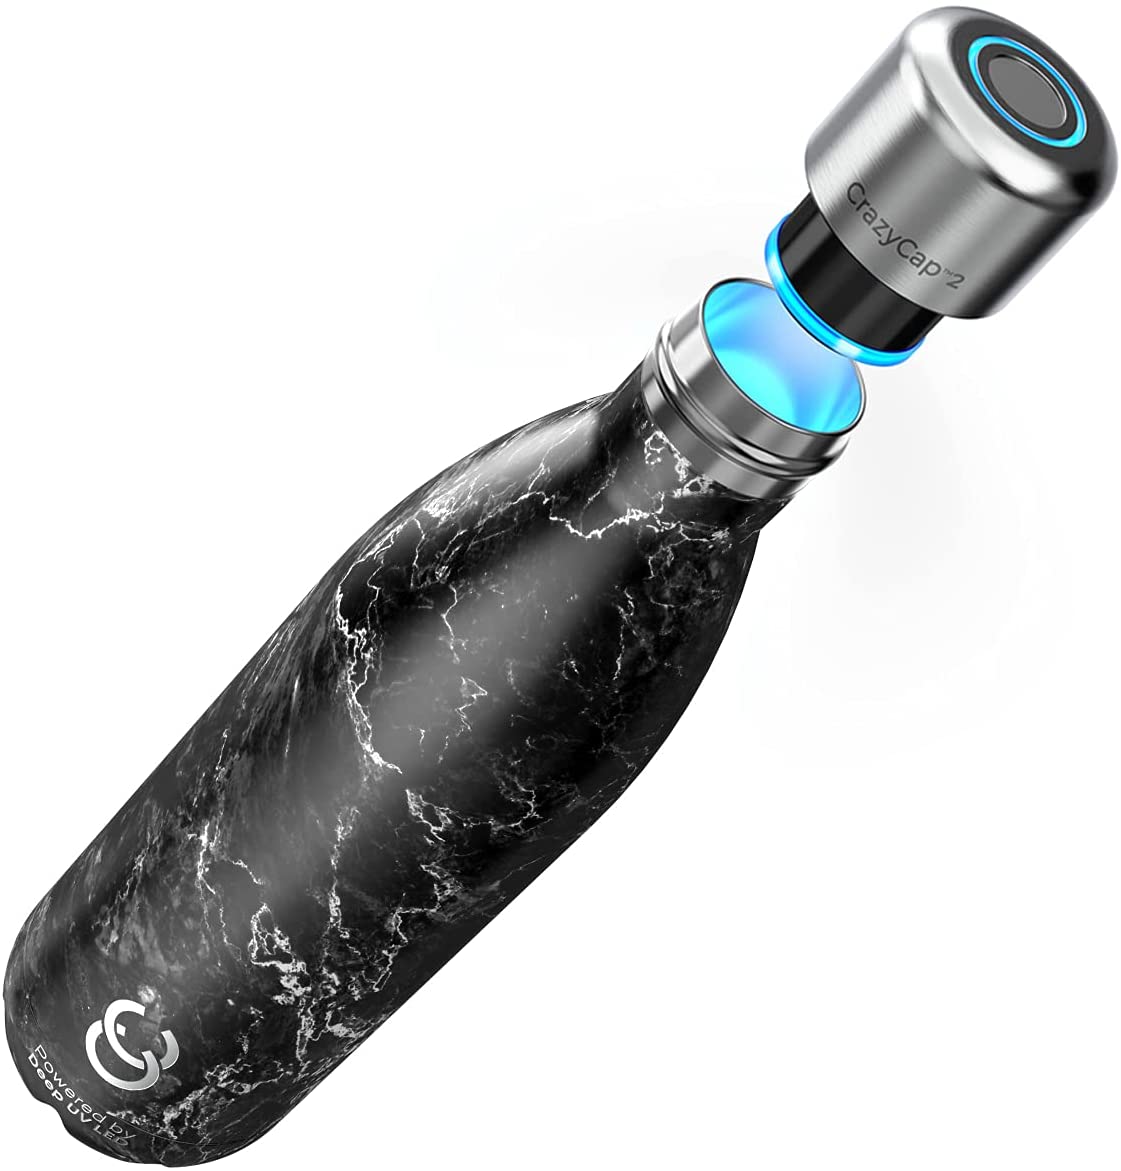 CrazyCap 2.0 UV Water Purifier & Self Cleaning Stainless Steel Insulated Water Bottle - Turns Any Water Source Into Clean Drinkable Water - Perfect for Hiking Camping Travel and Survival